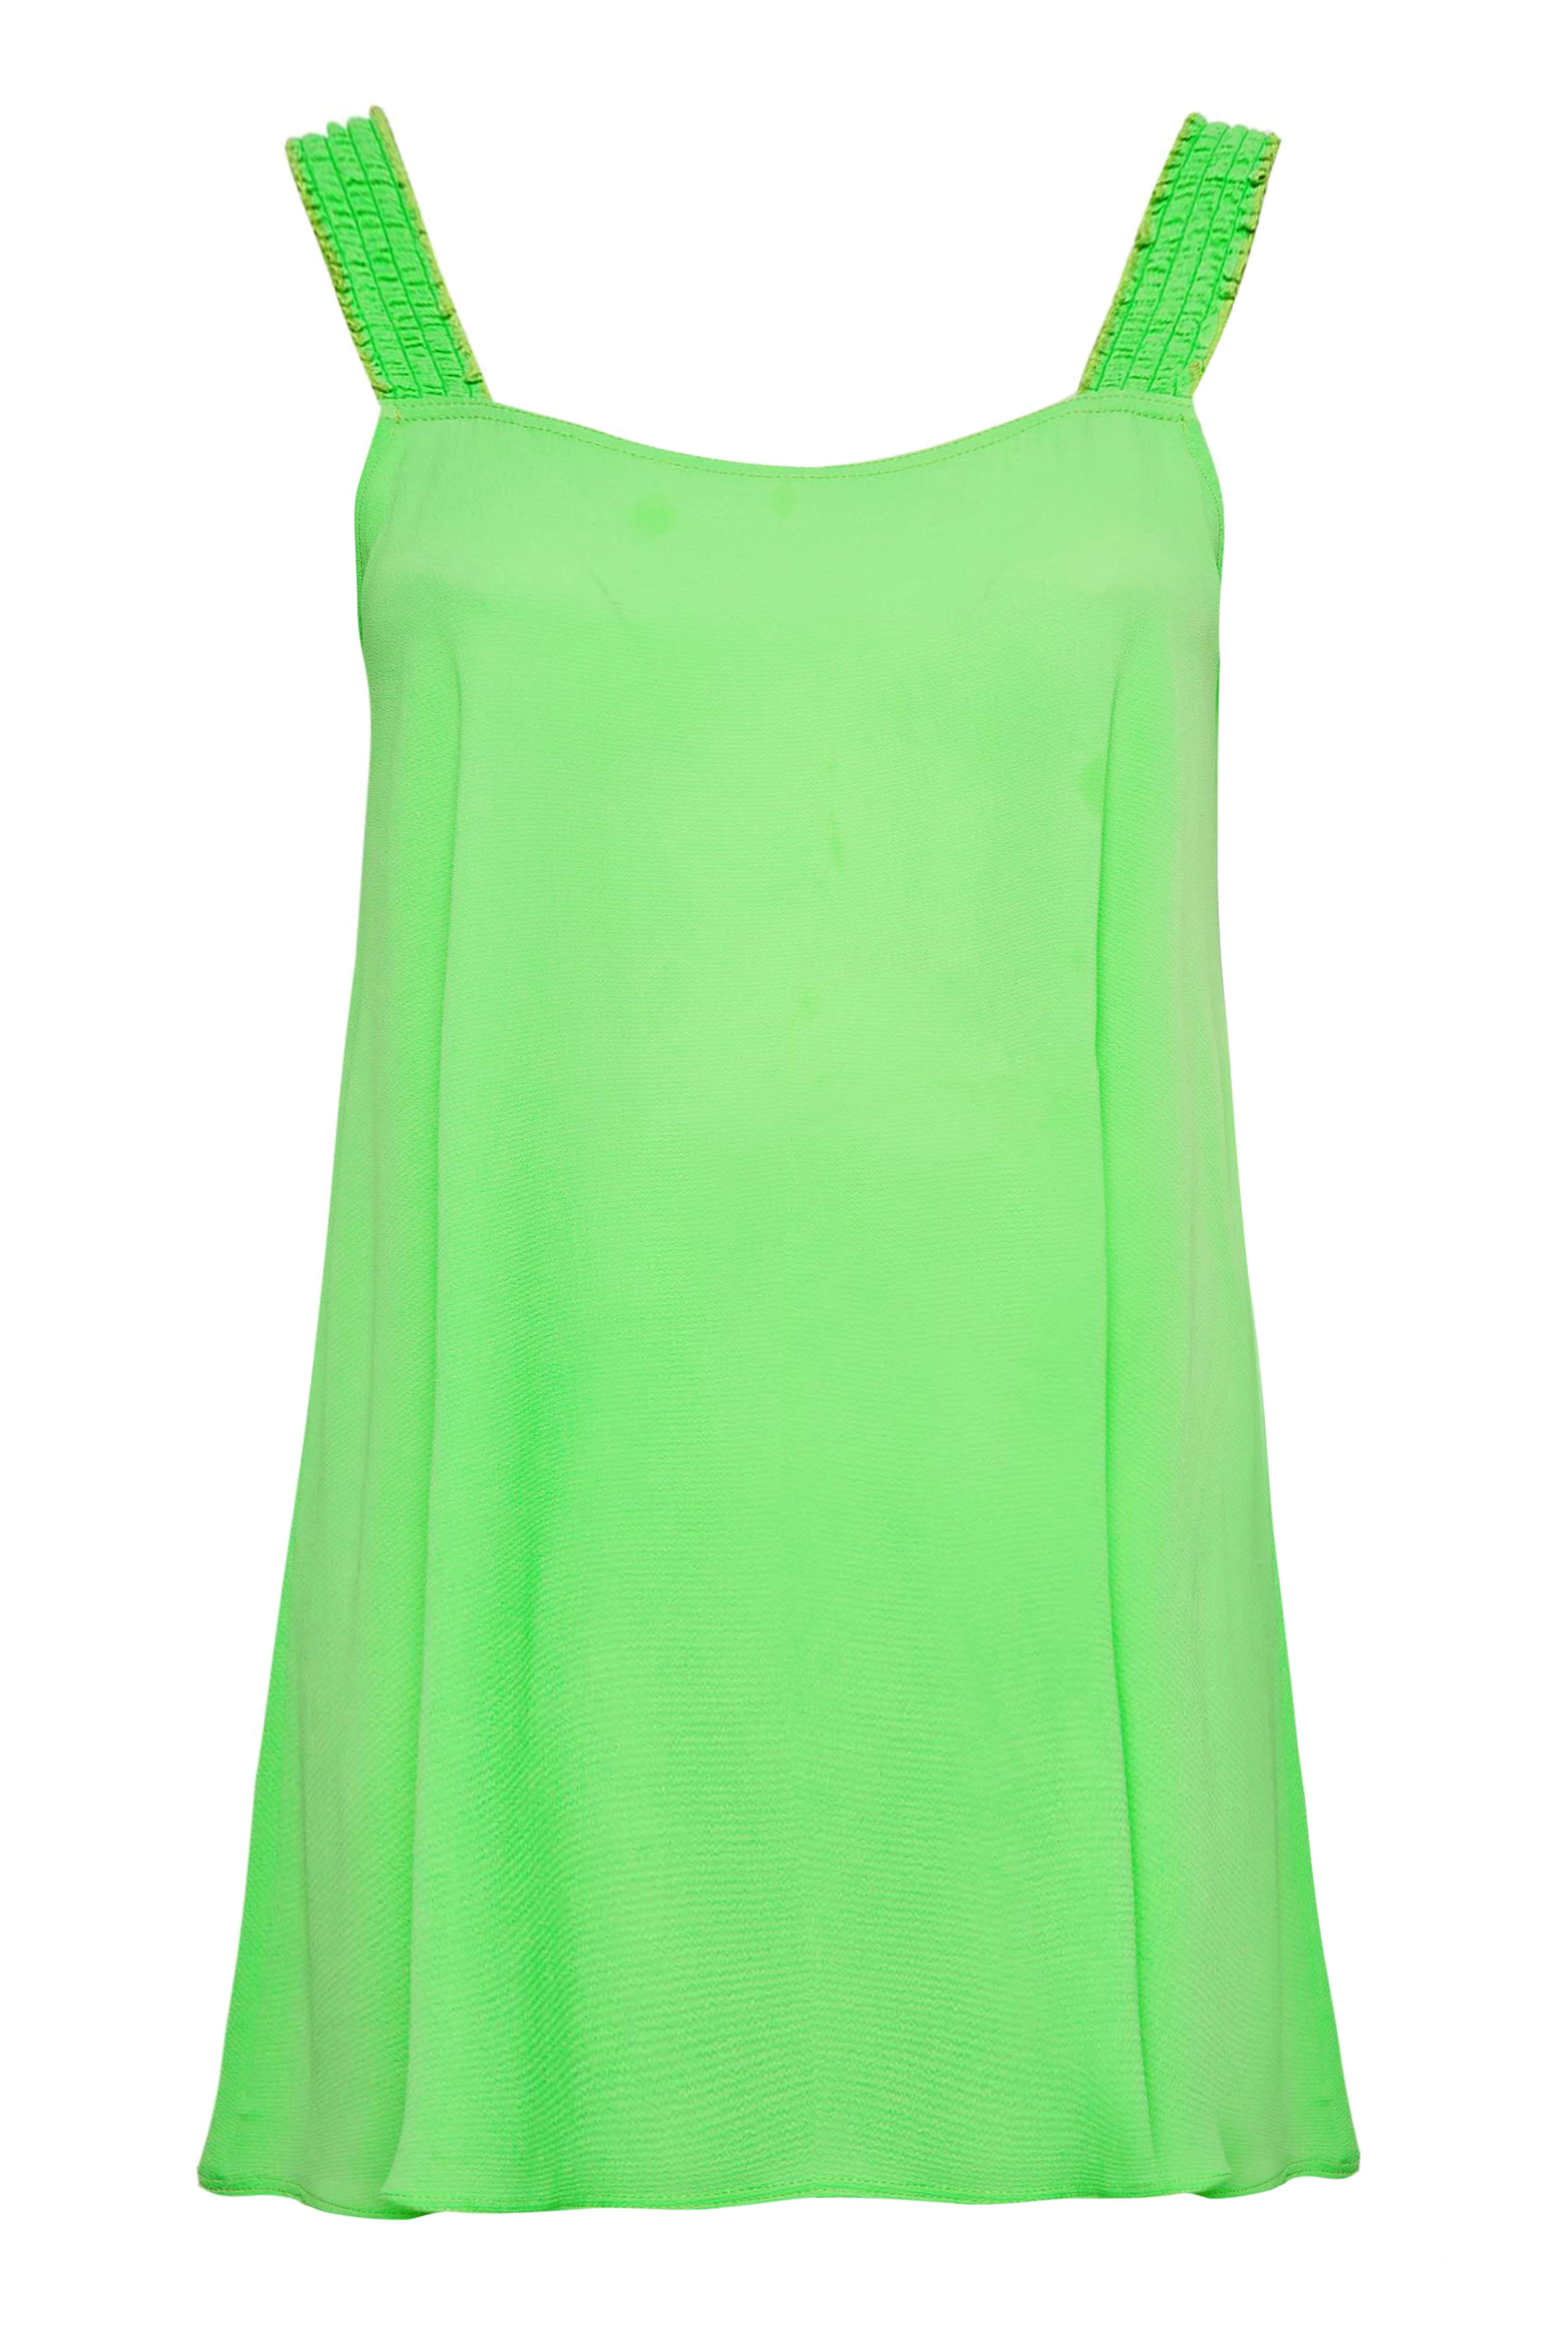 LIMITED COLLECTION Plus Size Bright Green Satin Cami Top